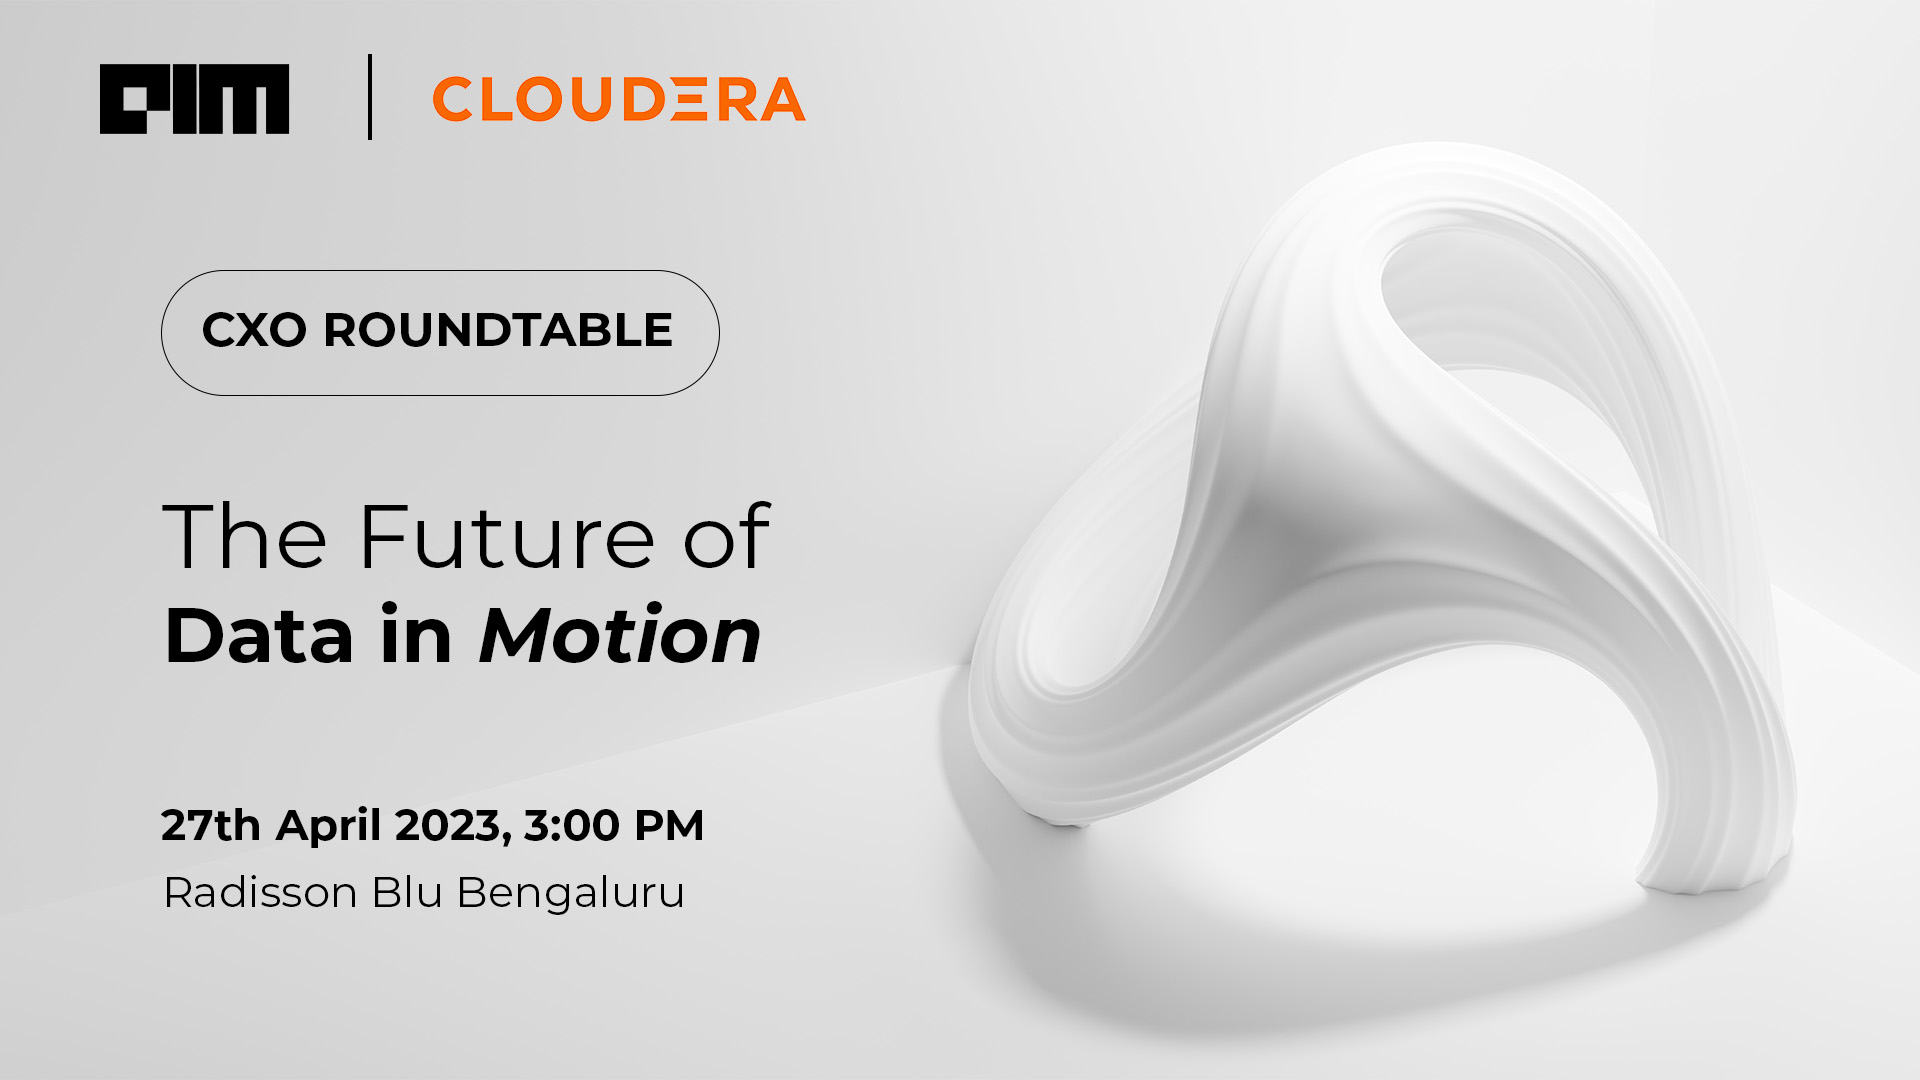 AIM High Tea Roundtable in partnership with Cloudera: An Exclusive Discussion with CXO Power Players about The Future of Data in Motion